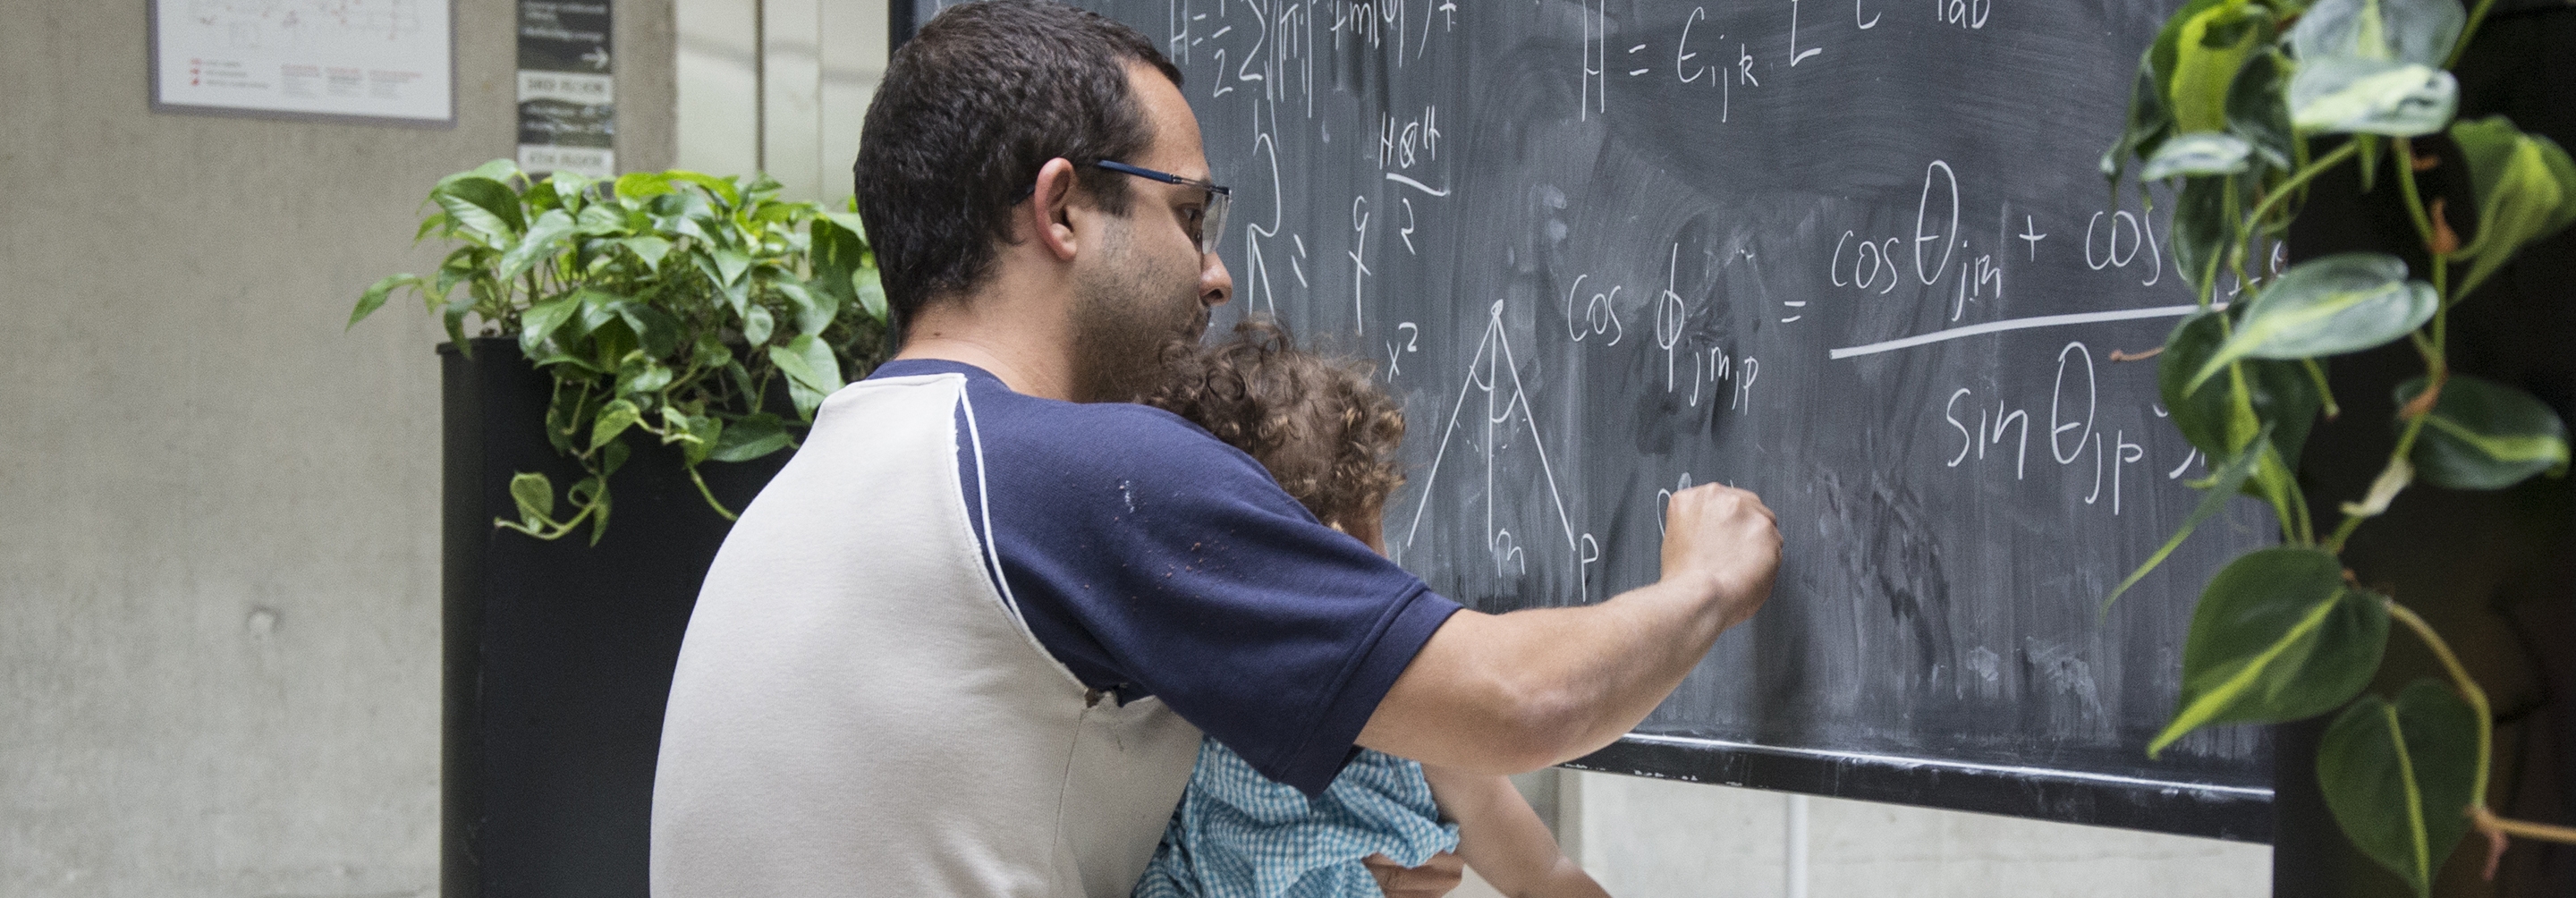 Man holding baby and writing equations on a blackboard